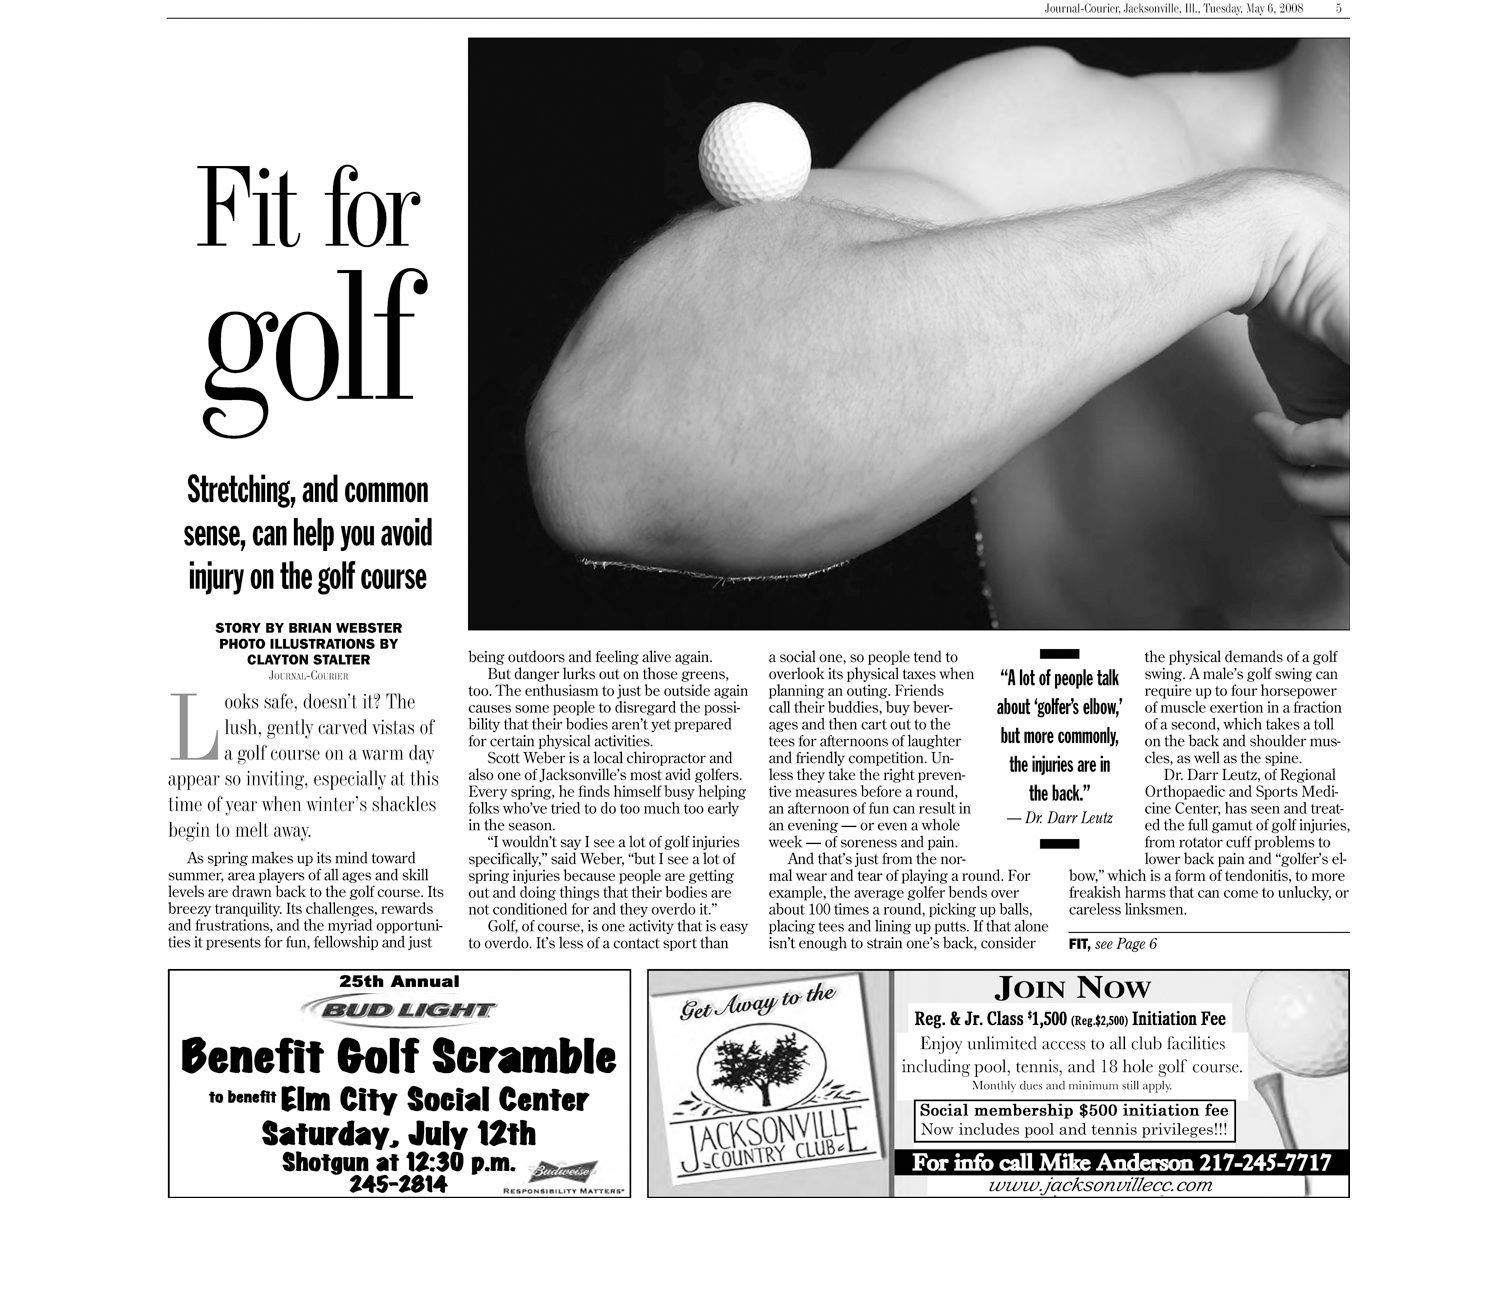  Golf supplement inside page illustration on the importance of fitness and stretching to prevent injuries.&nbsp; 